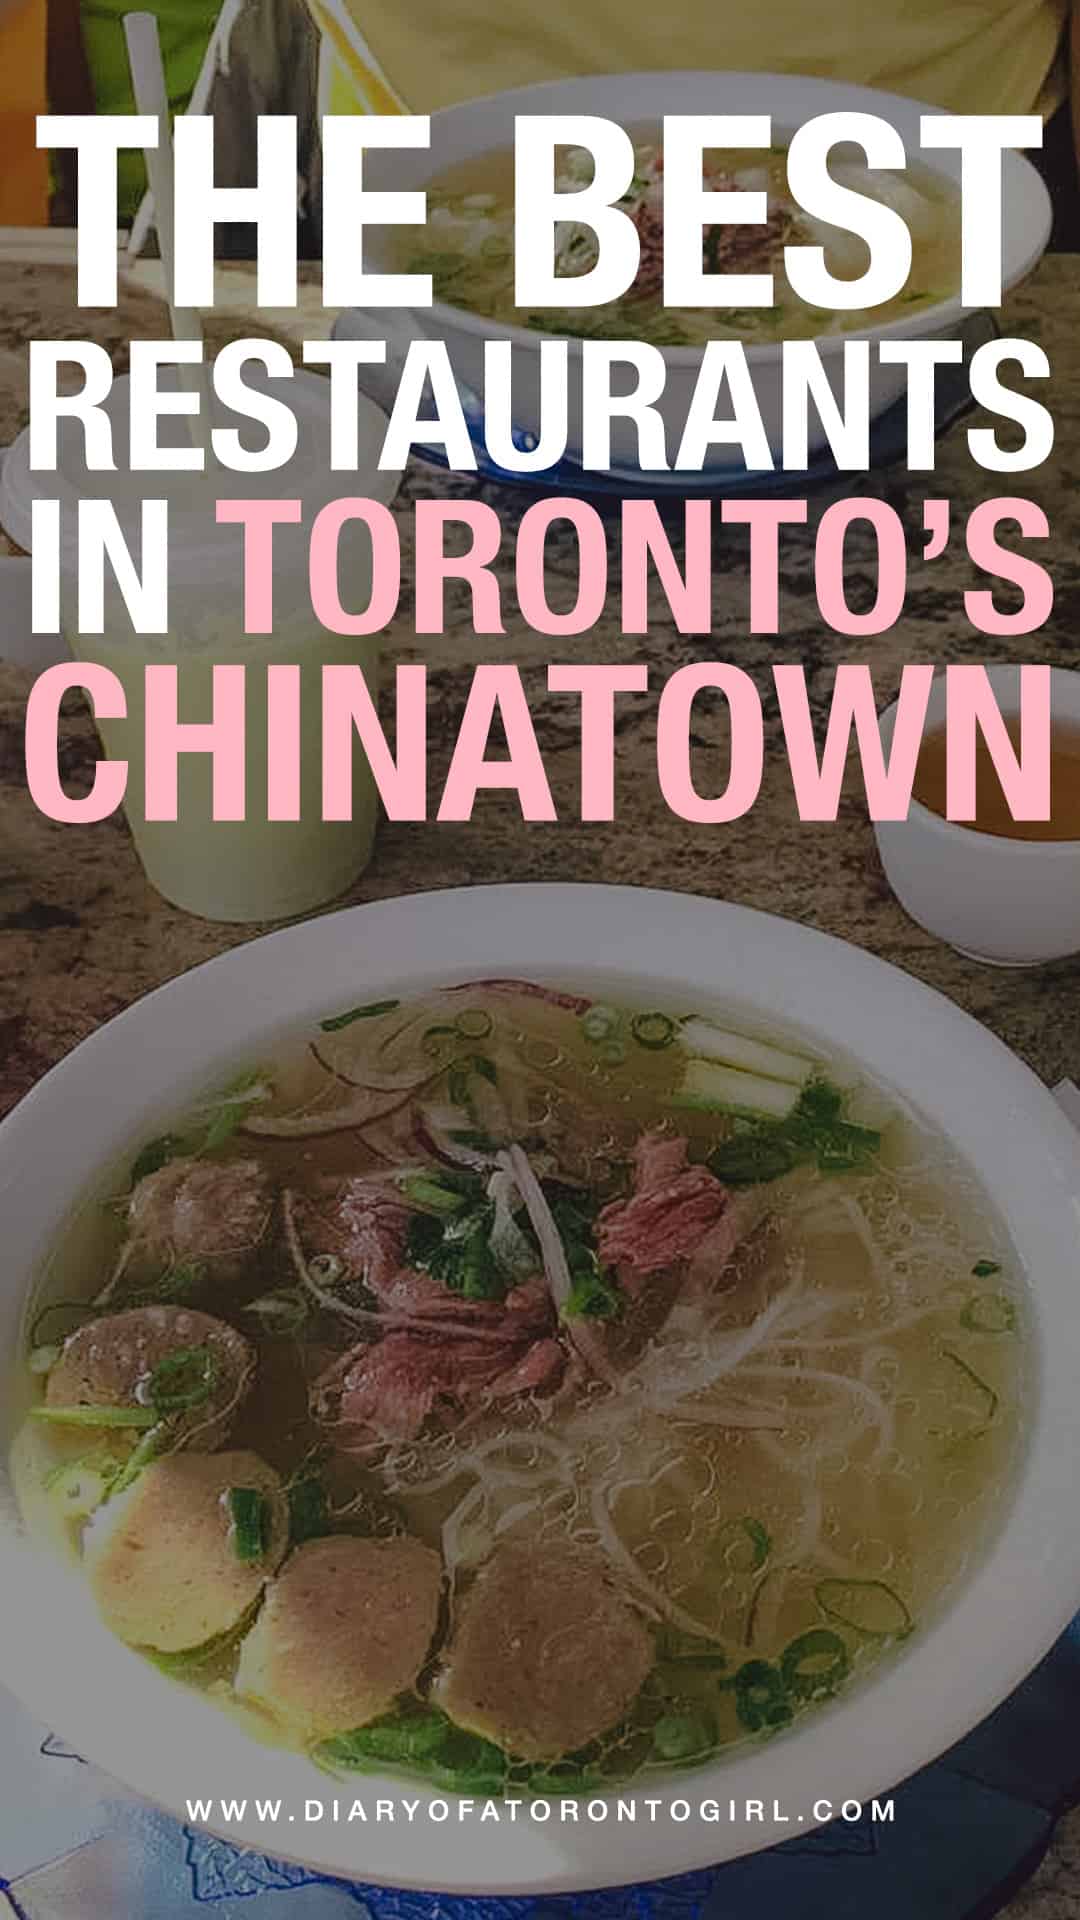 Looking for the best restaurants in Toronto's Chinatown? From classic Chinese cuisine to Vietnamese street food, there are plenty of delicious places to eat in Chinatown. Here are some of the best food spots to visit in Chinatown, Toronto!